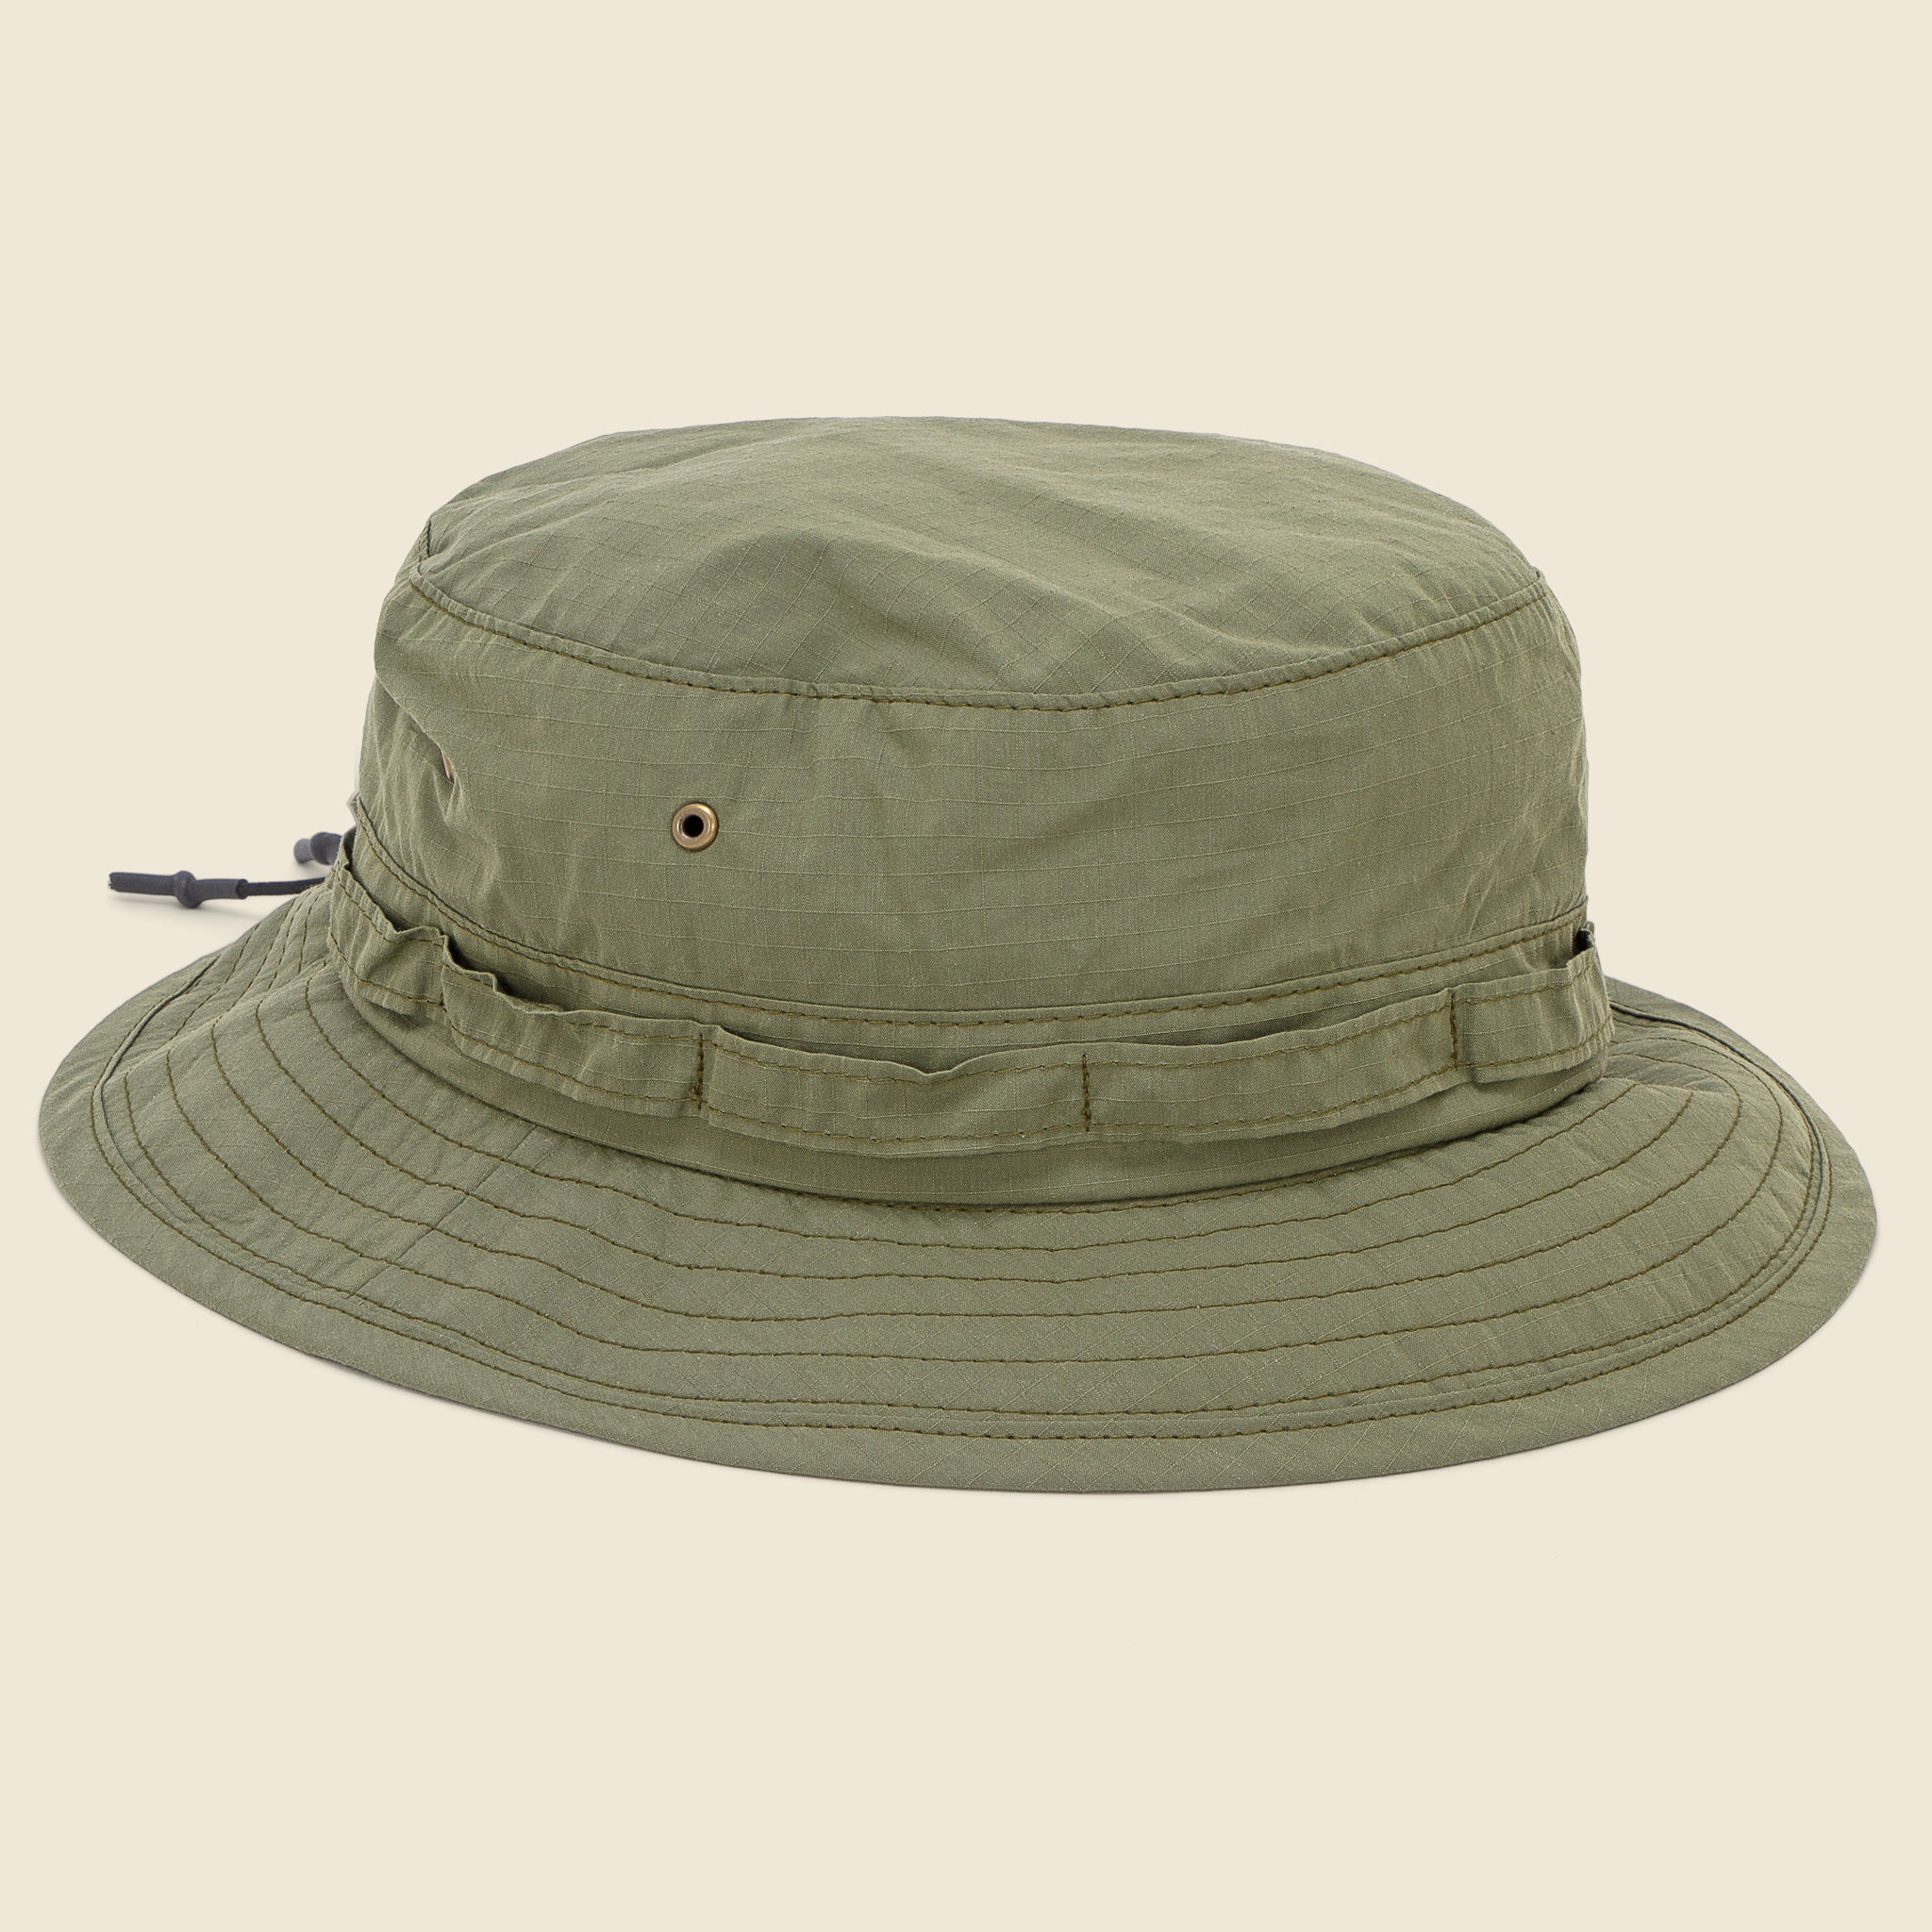 Rip-Stop Cordura Jungle Hat - Olive - BEAMS+ - STAG Provisions - Accessories - Hats